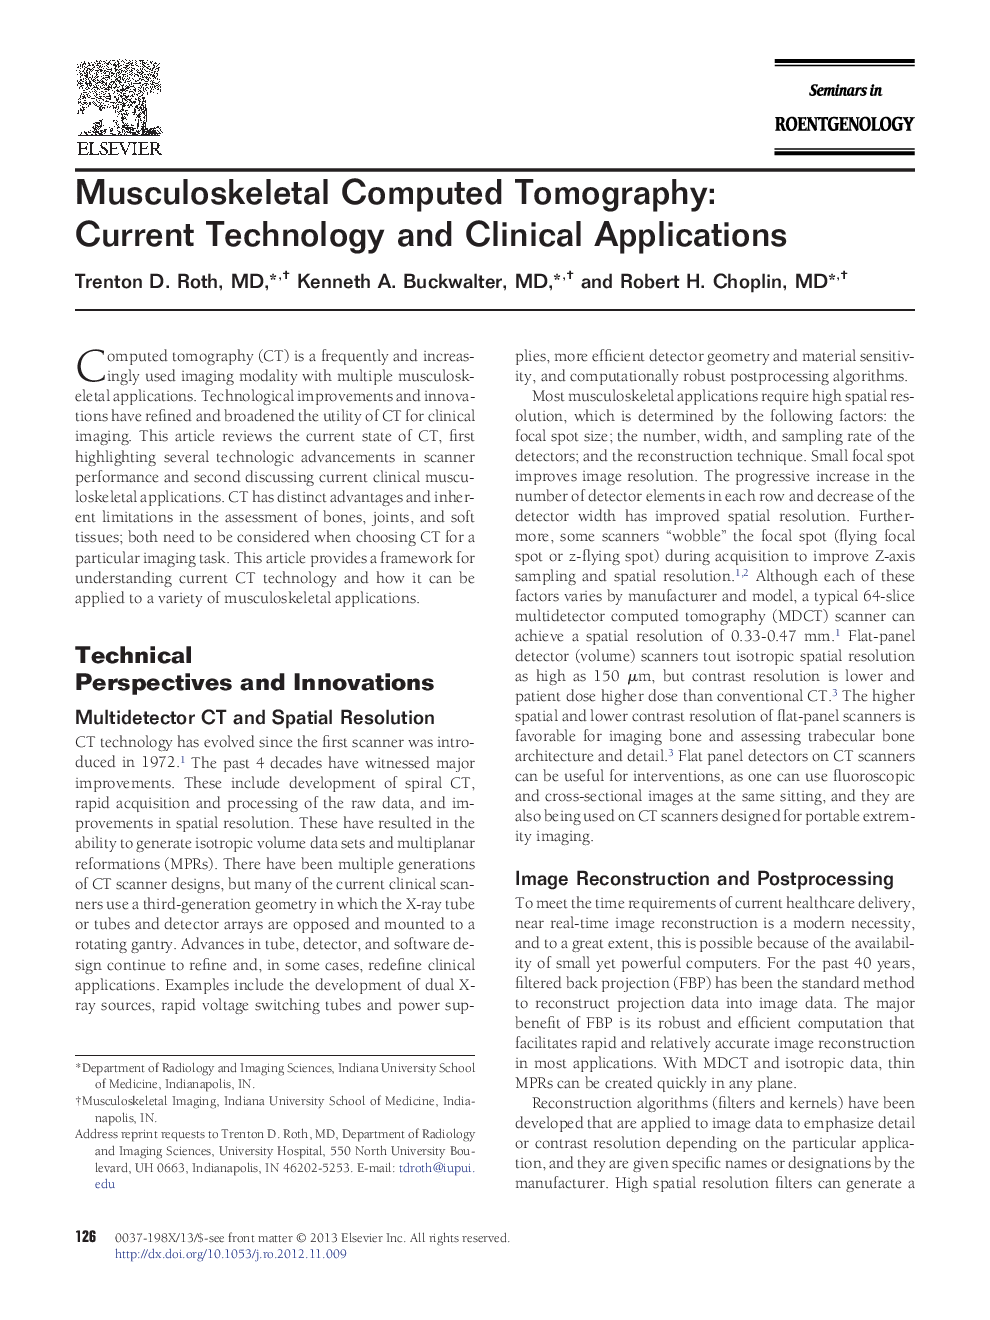 Musculoskeletal Computed Tomography: Current Technology and Clinical Applications